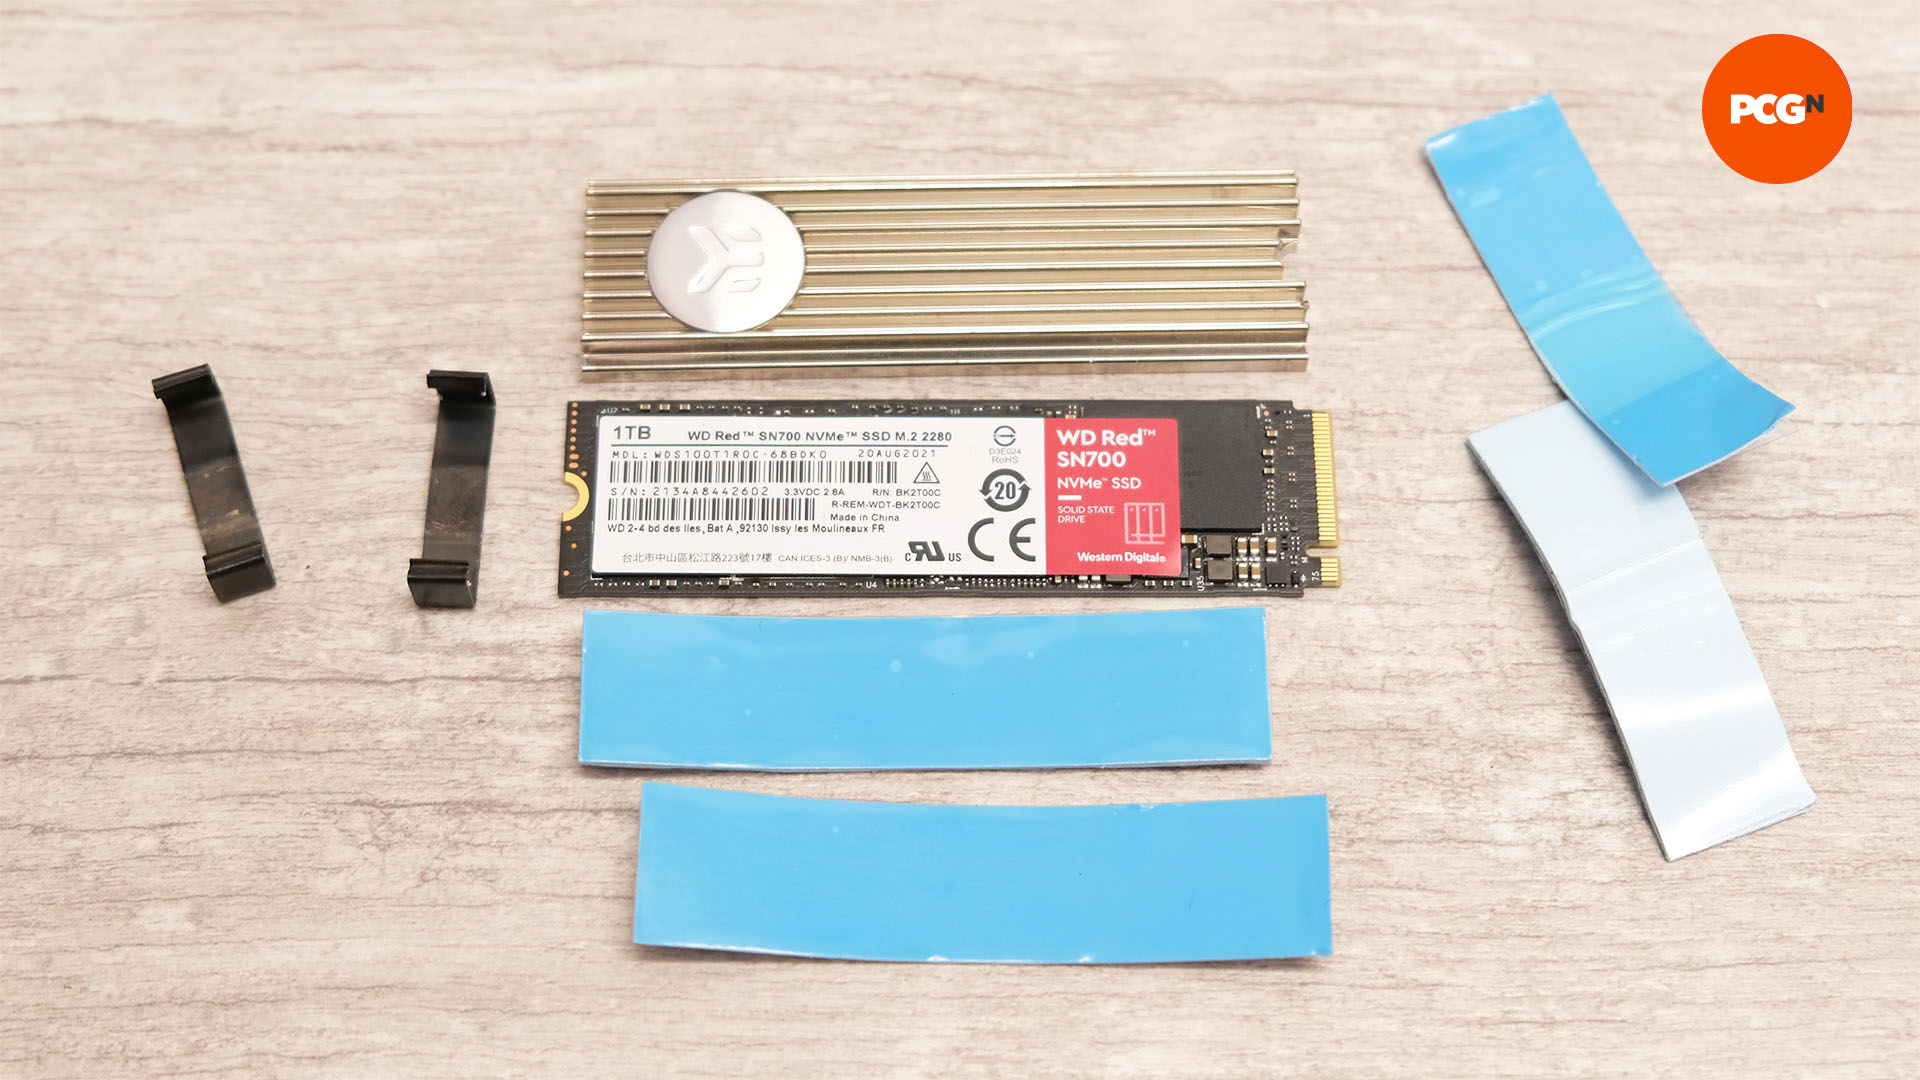 How to install an M.2 SSD: Leave the sticker on